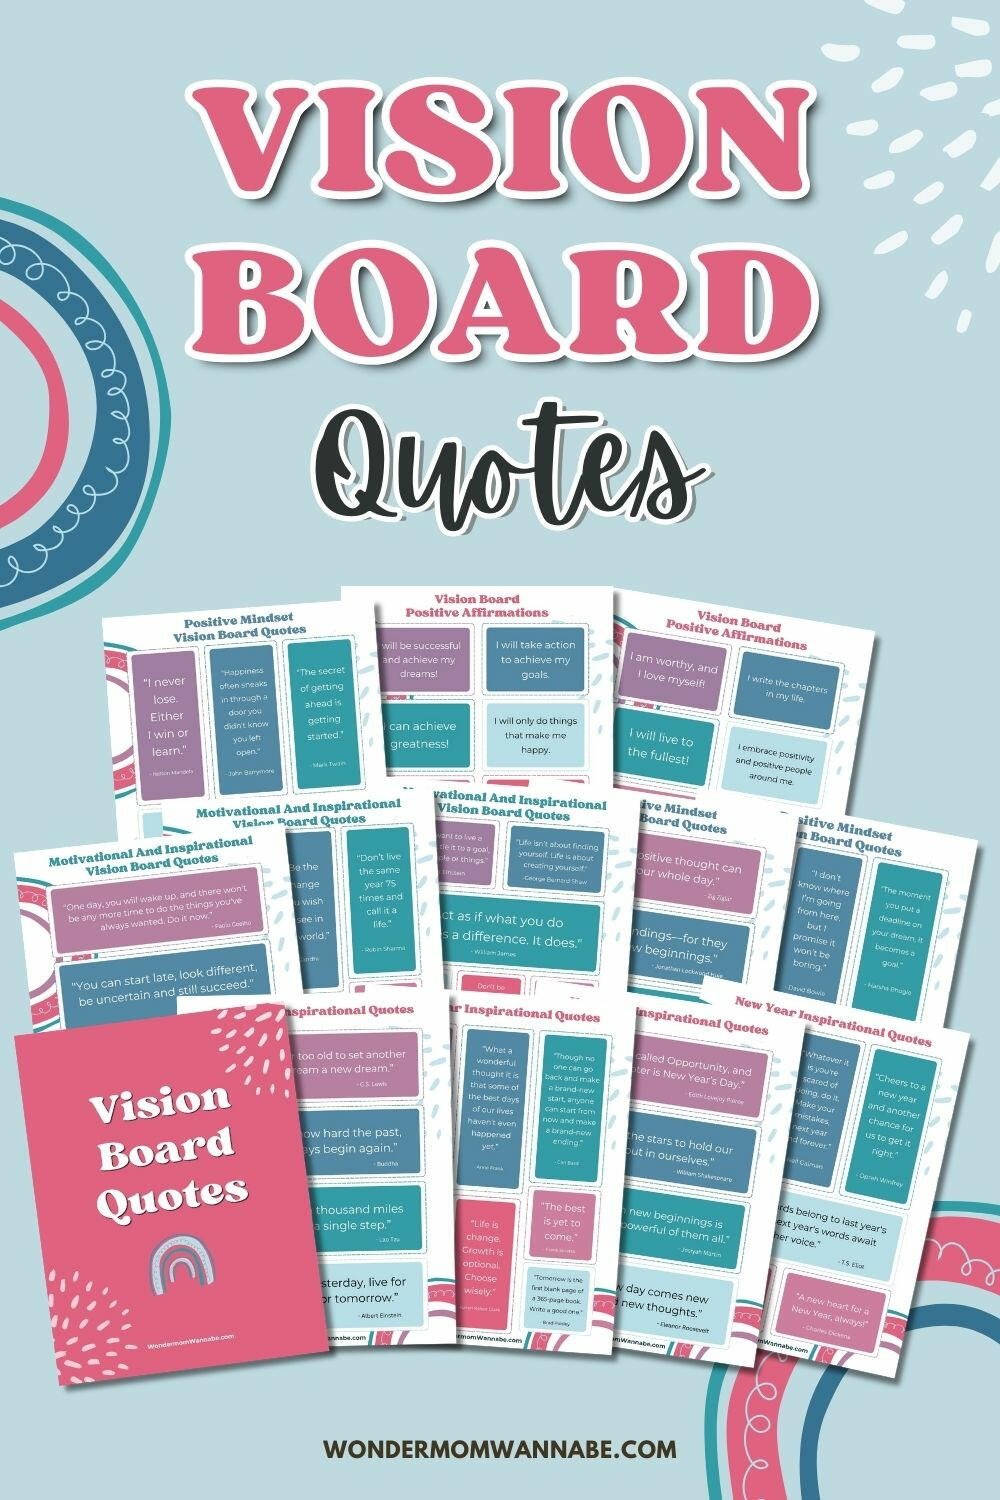 73 Best Vision Board Quotes + Affirmations To Inspire You ...